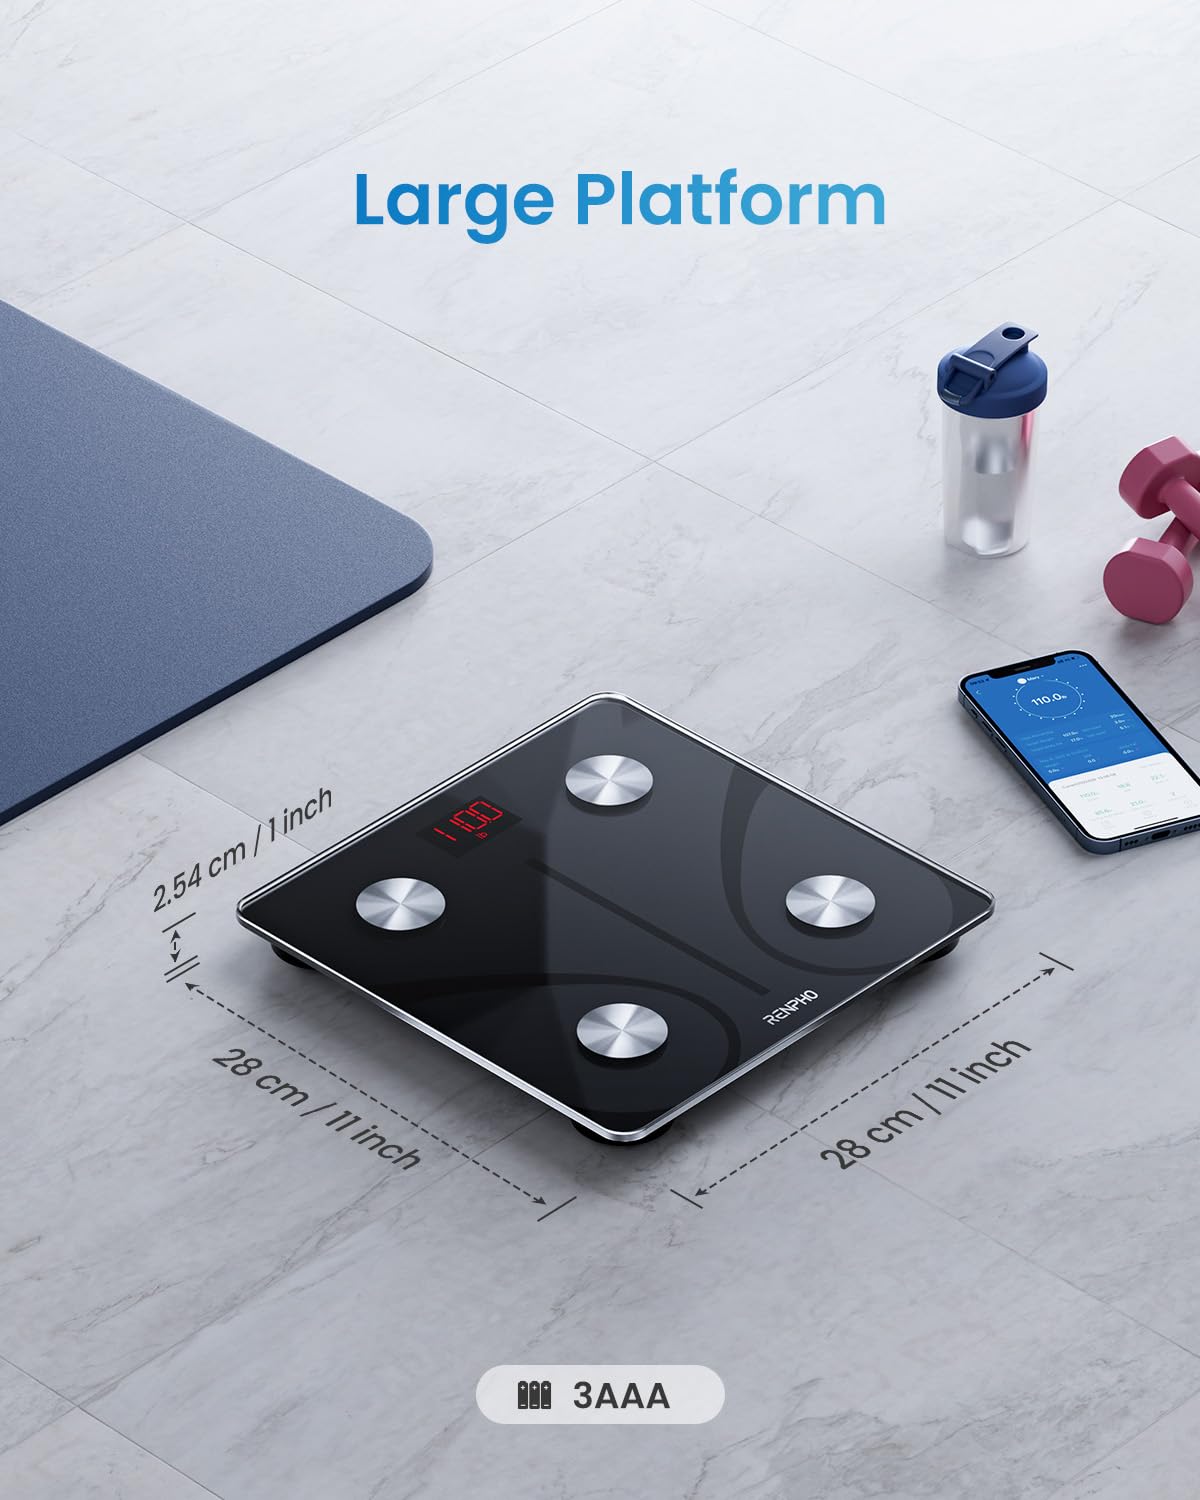 Renpho's Elis 1 Smart Body Scale with a large platform displayed on a tiled floor, equipped for body composition analysis and connected to a smartphone app. A gym mat, water bottle, and dumbbells are nearby.